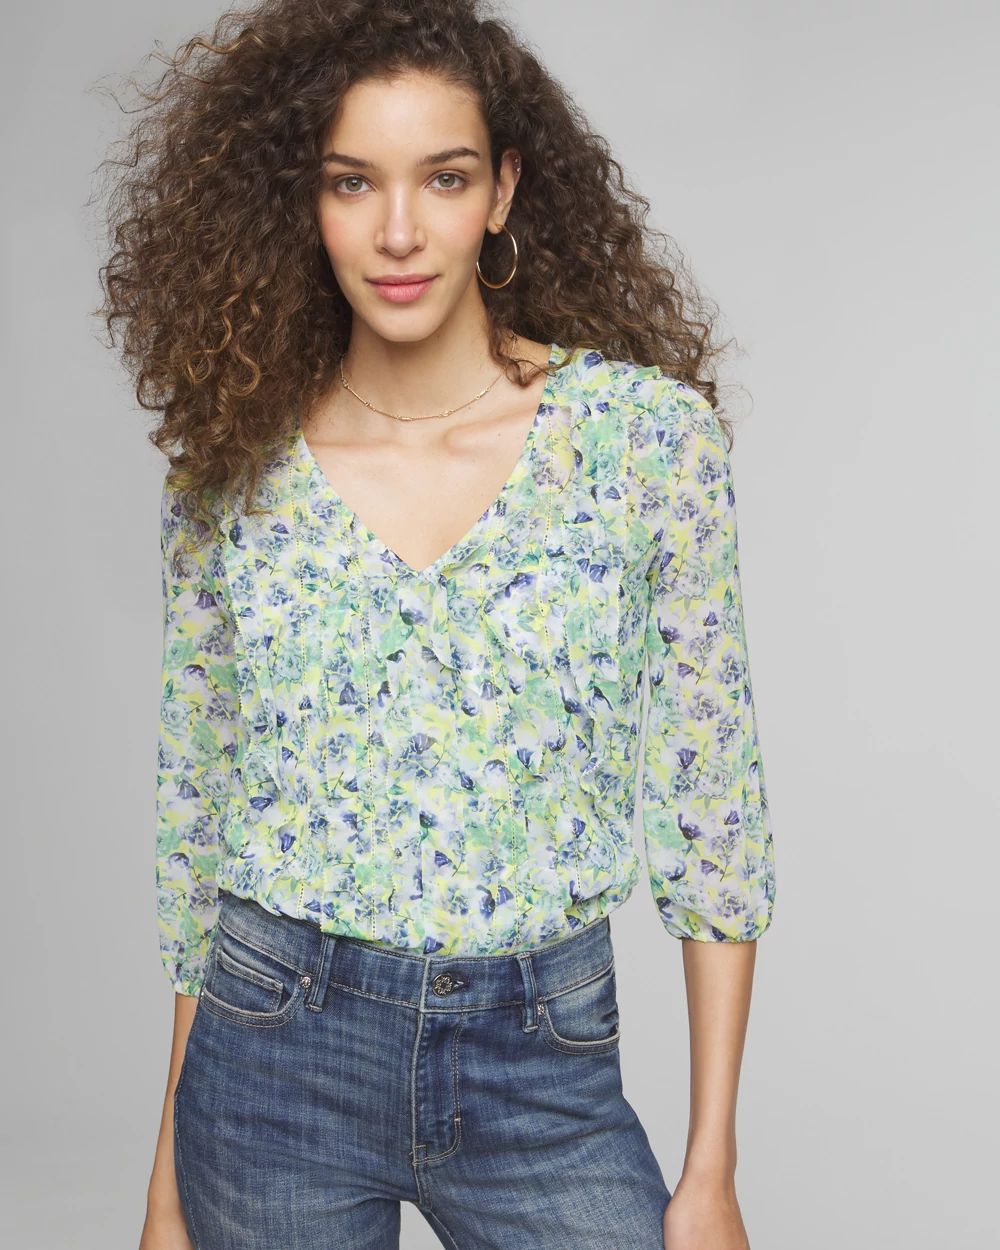 Long Sleeve V-Neck Ruffle Front Blouse click to view larger image.